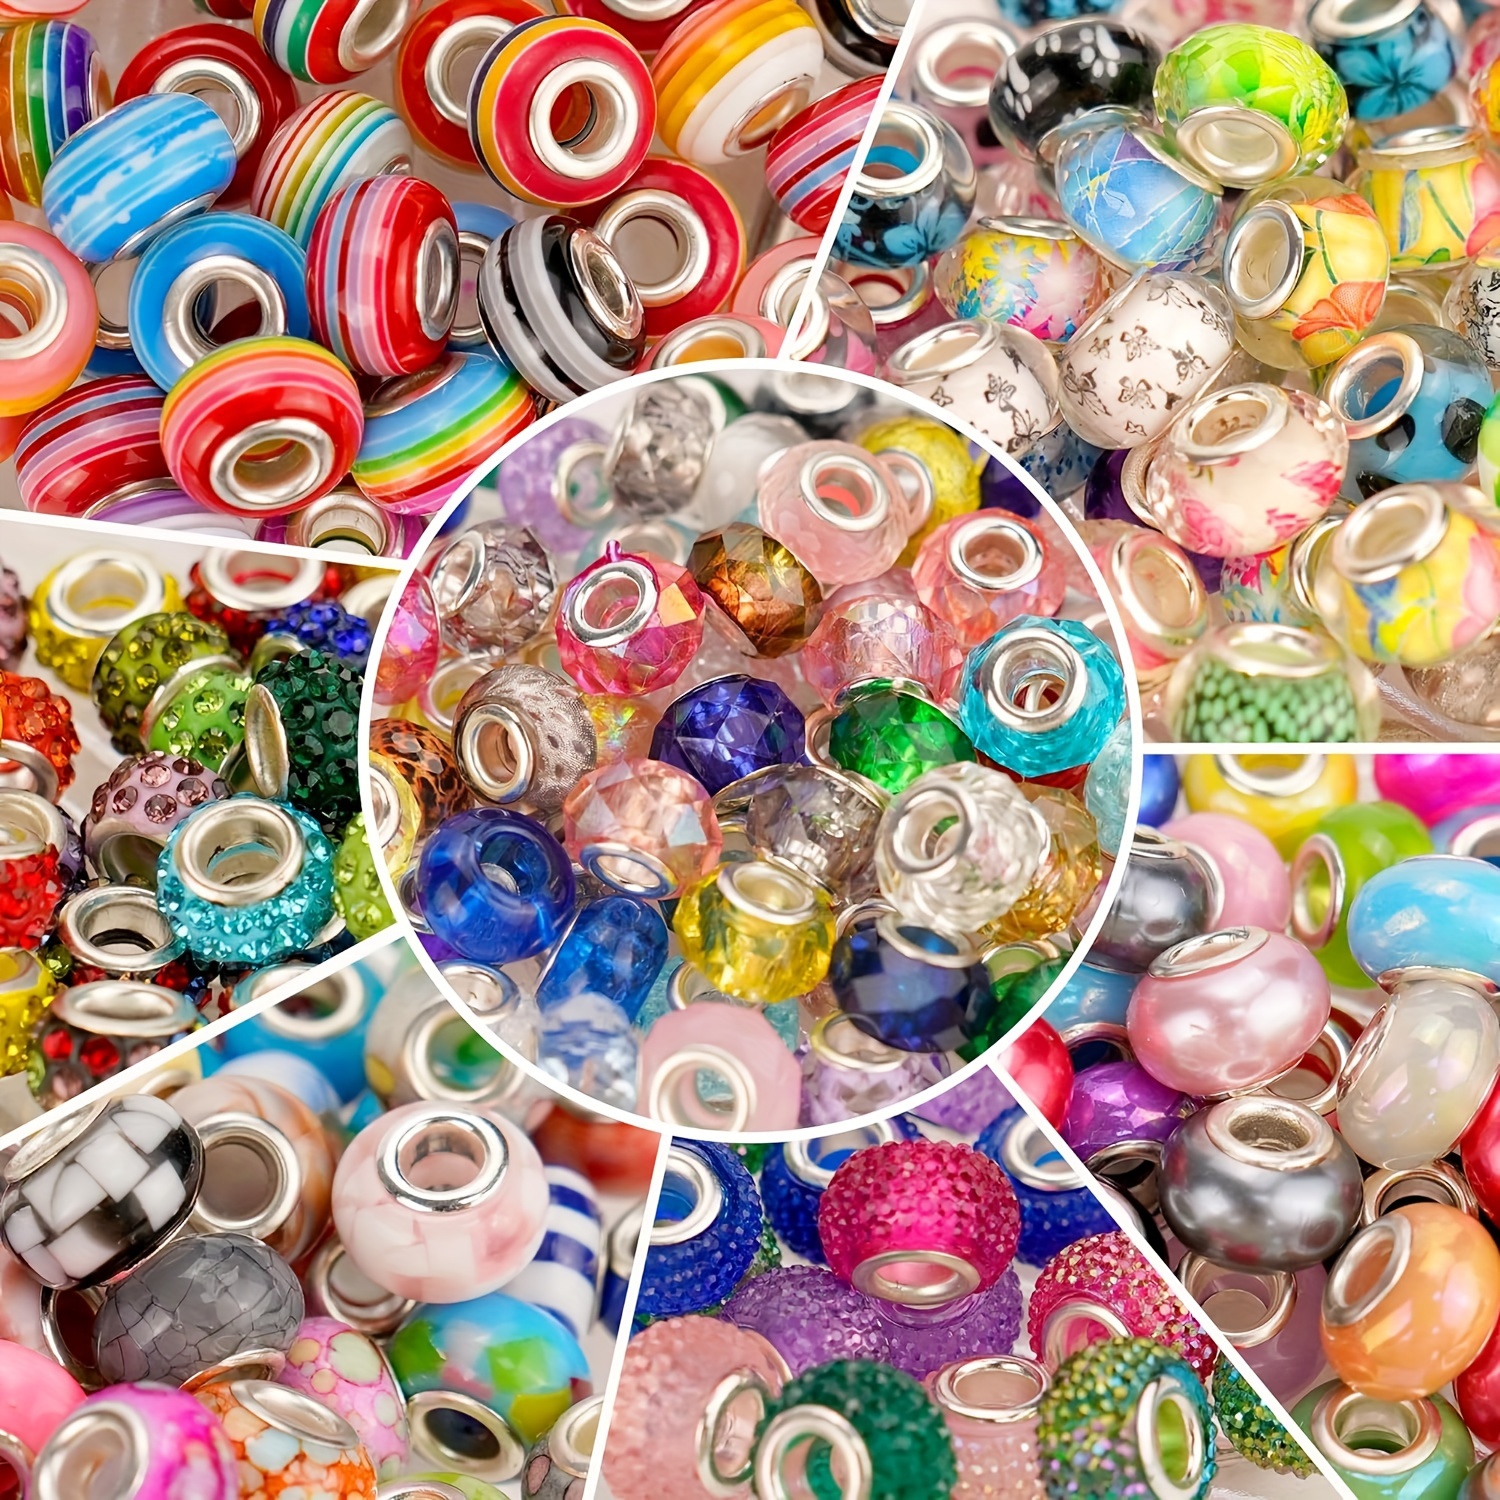 

Assorted European Craft Beads: 50/100 Pcs Large Hole Spacer Beads For Diy Charms, Bracelet Jewelry Making - Mixed Color Crystal Lampwork Beads - Glass Material